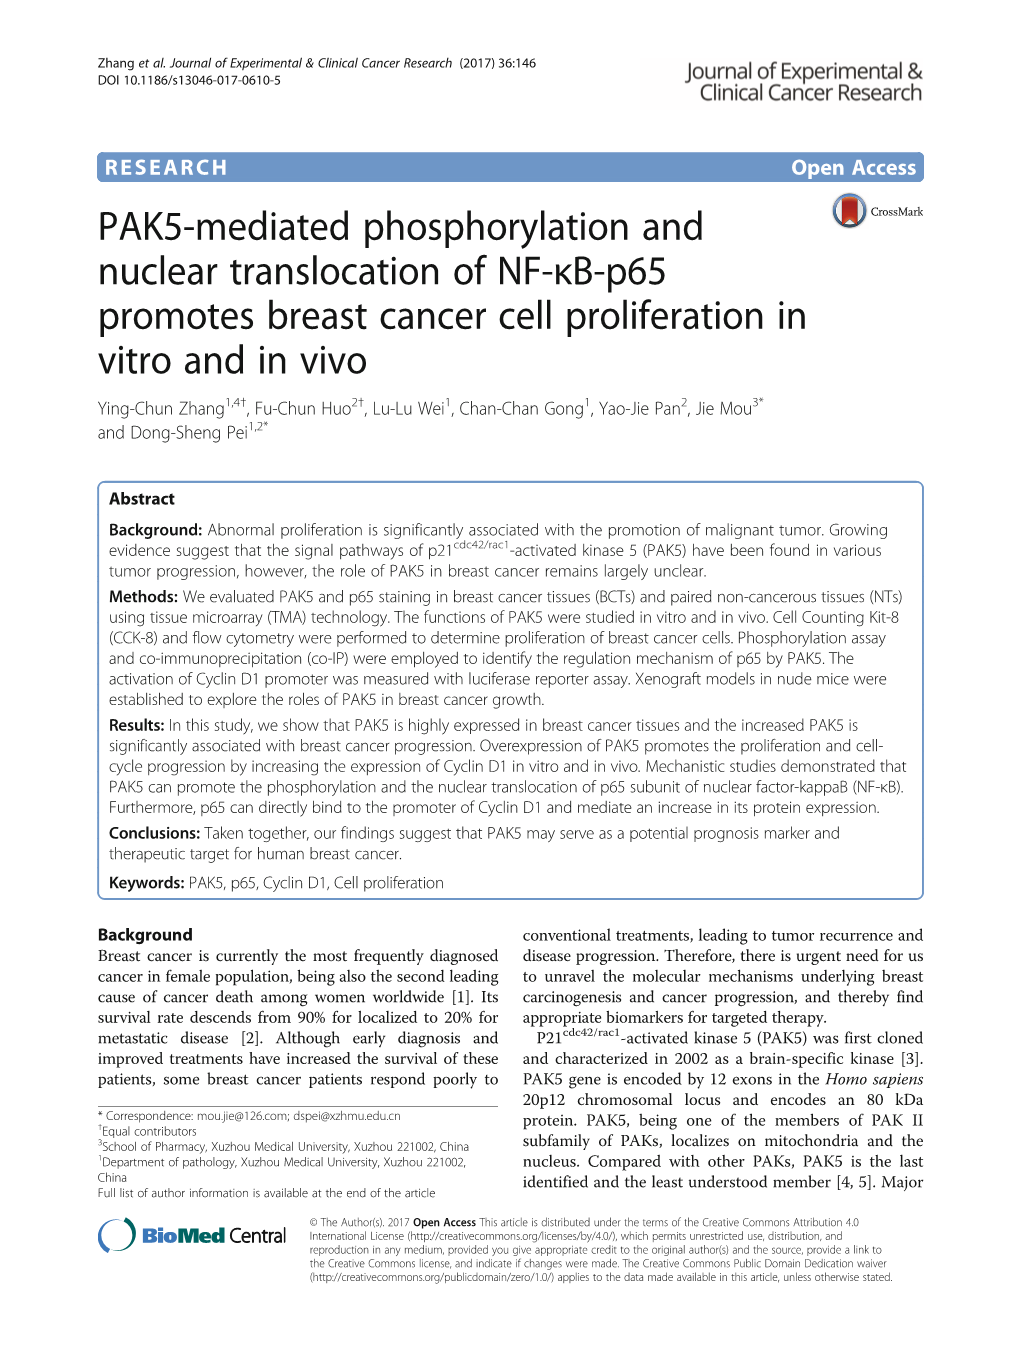 PAK5-Mediated Phosphorylation and Nuclear Translocation of NF-Κb-P65